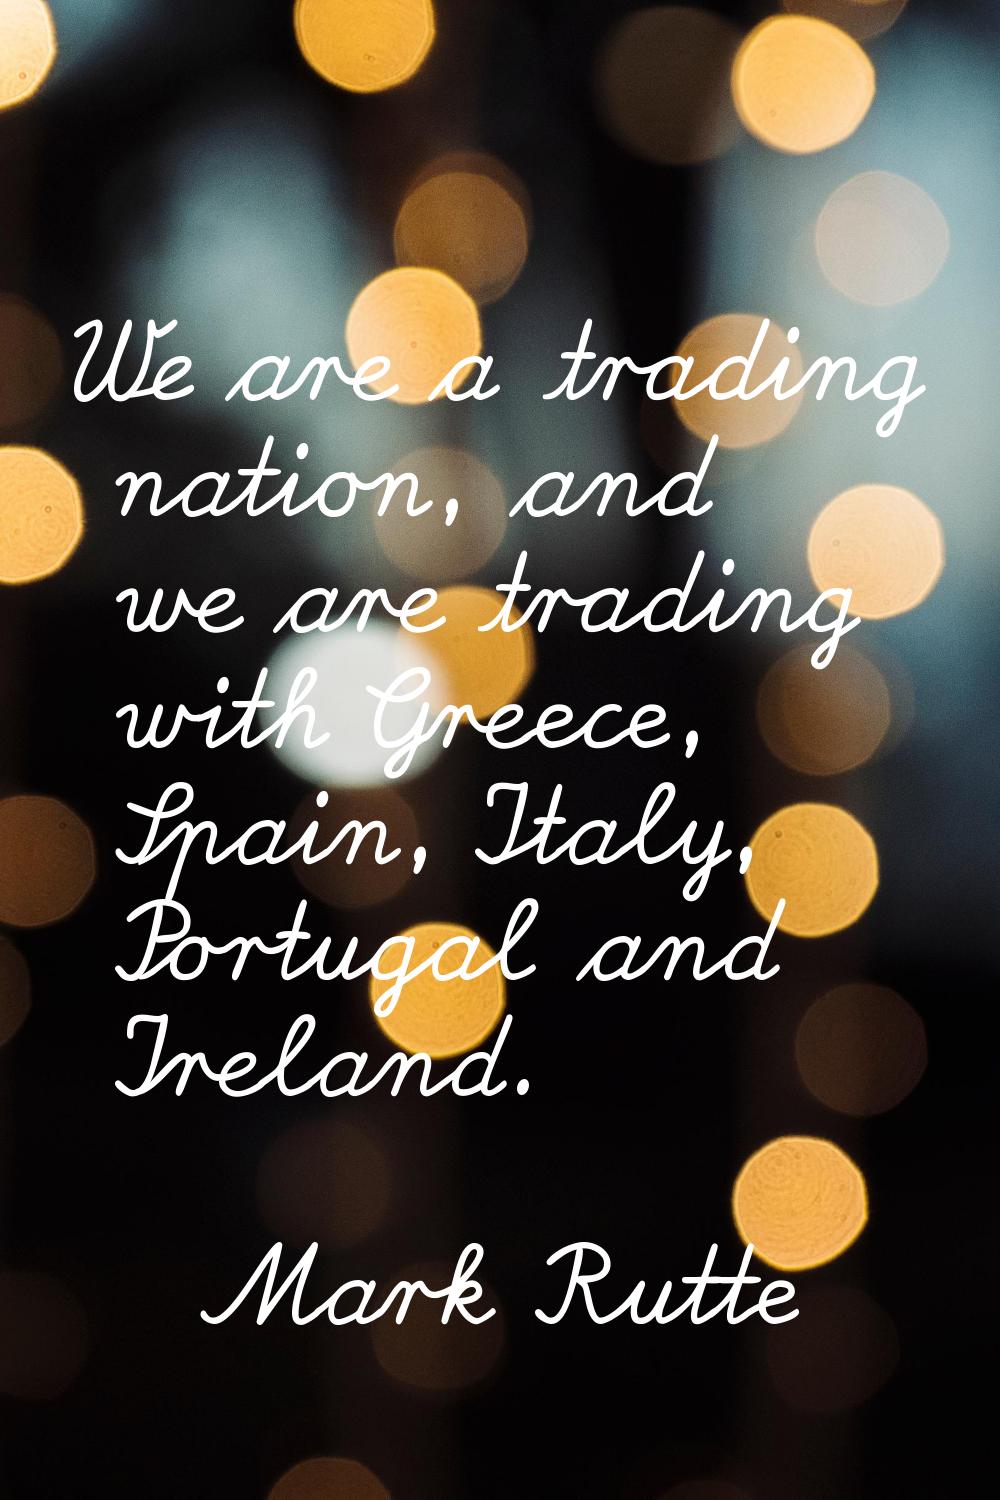 We are a trading nation, and we are trading with Greece, Spain, Italy, Portugal and Ireland.